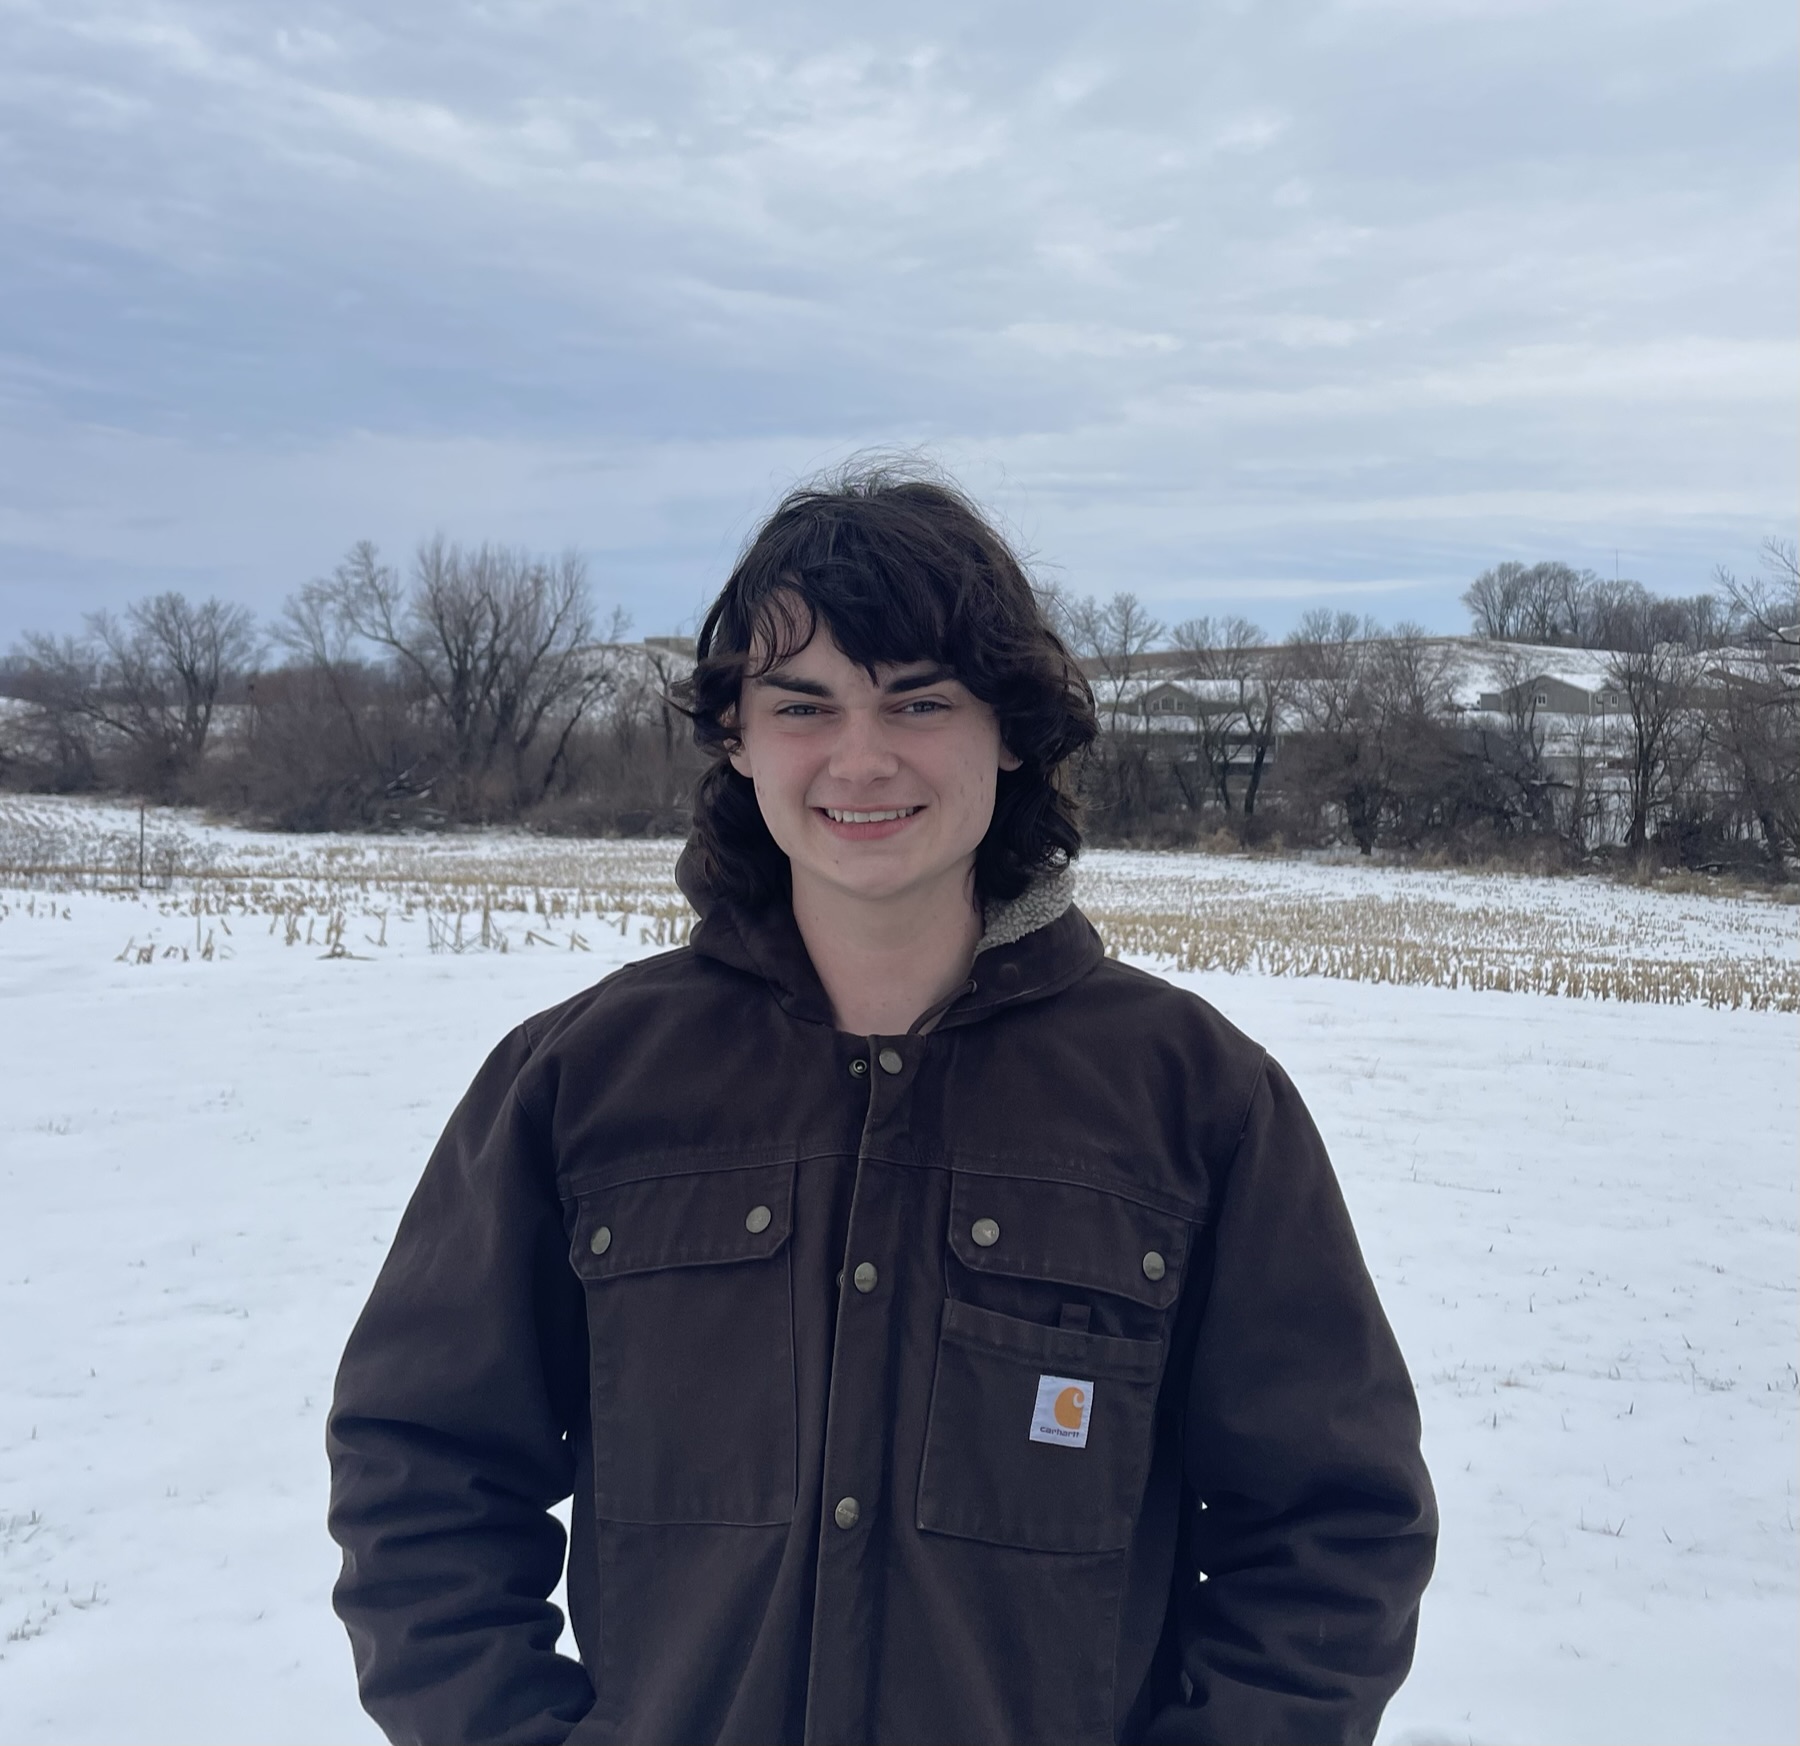 Ethan standing in a snowy cornfield.